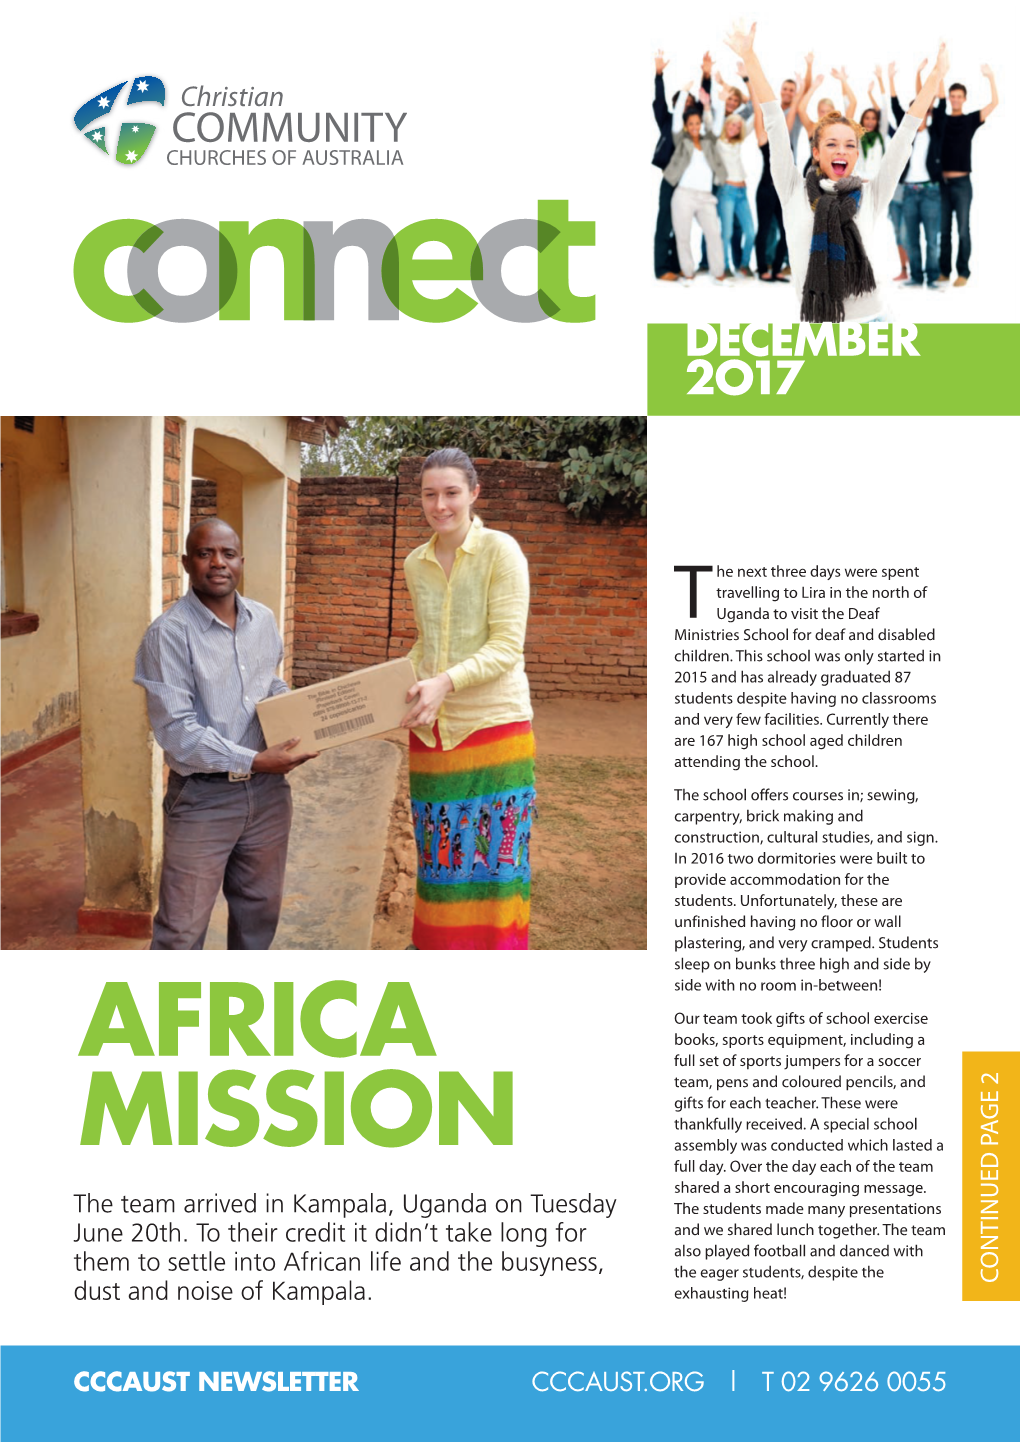 Africa Mission